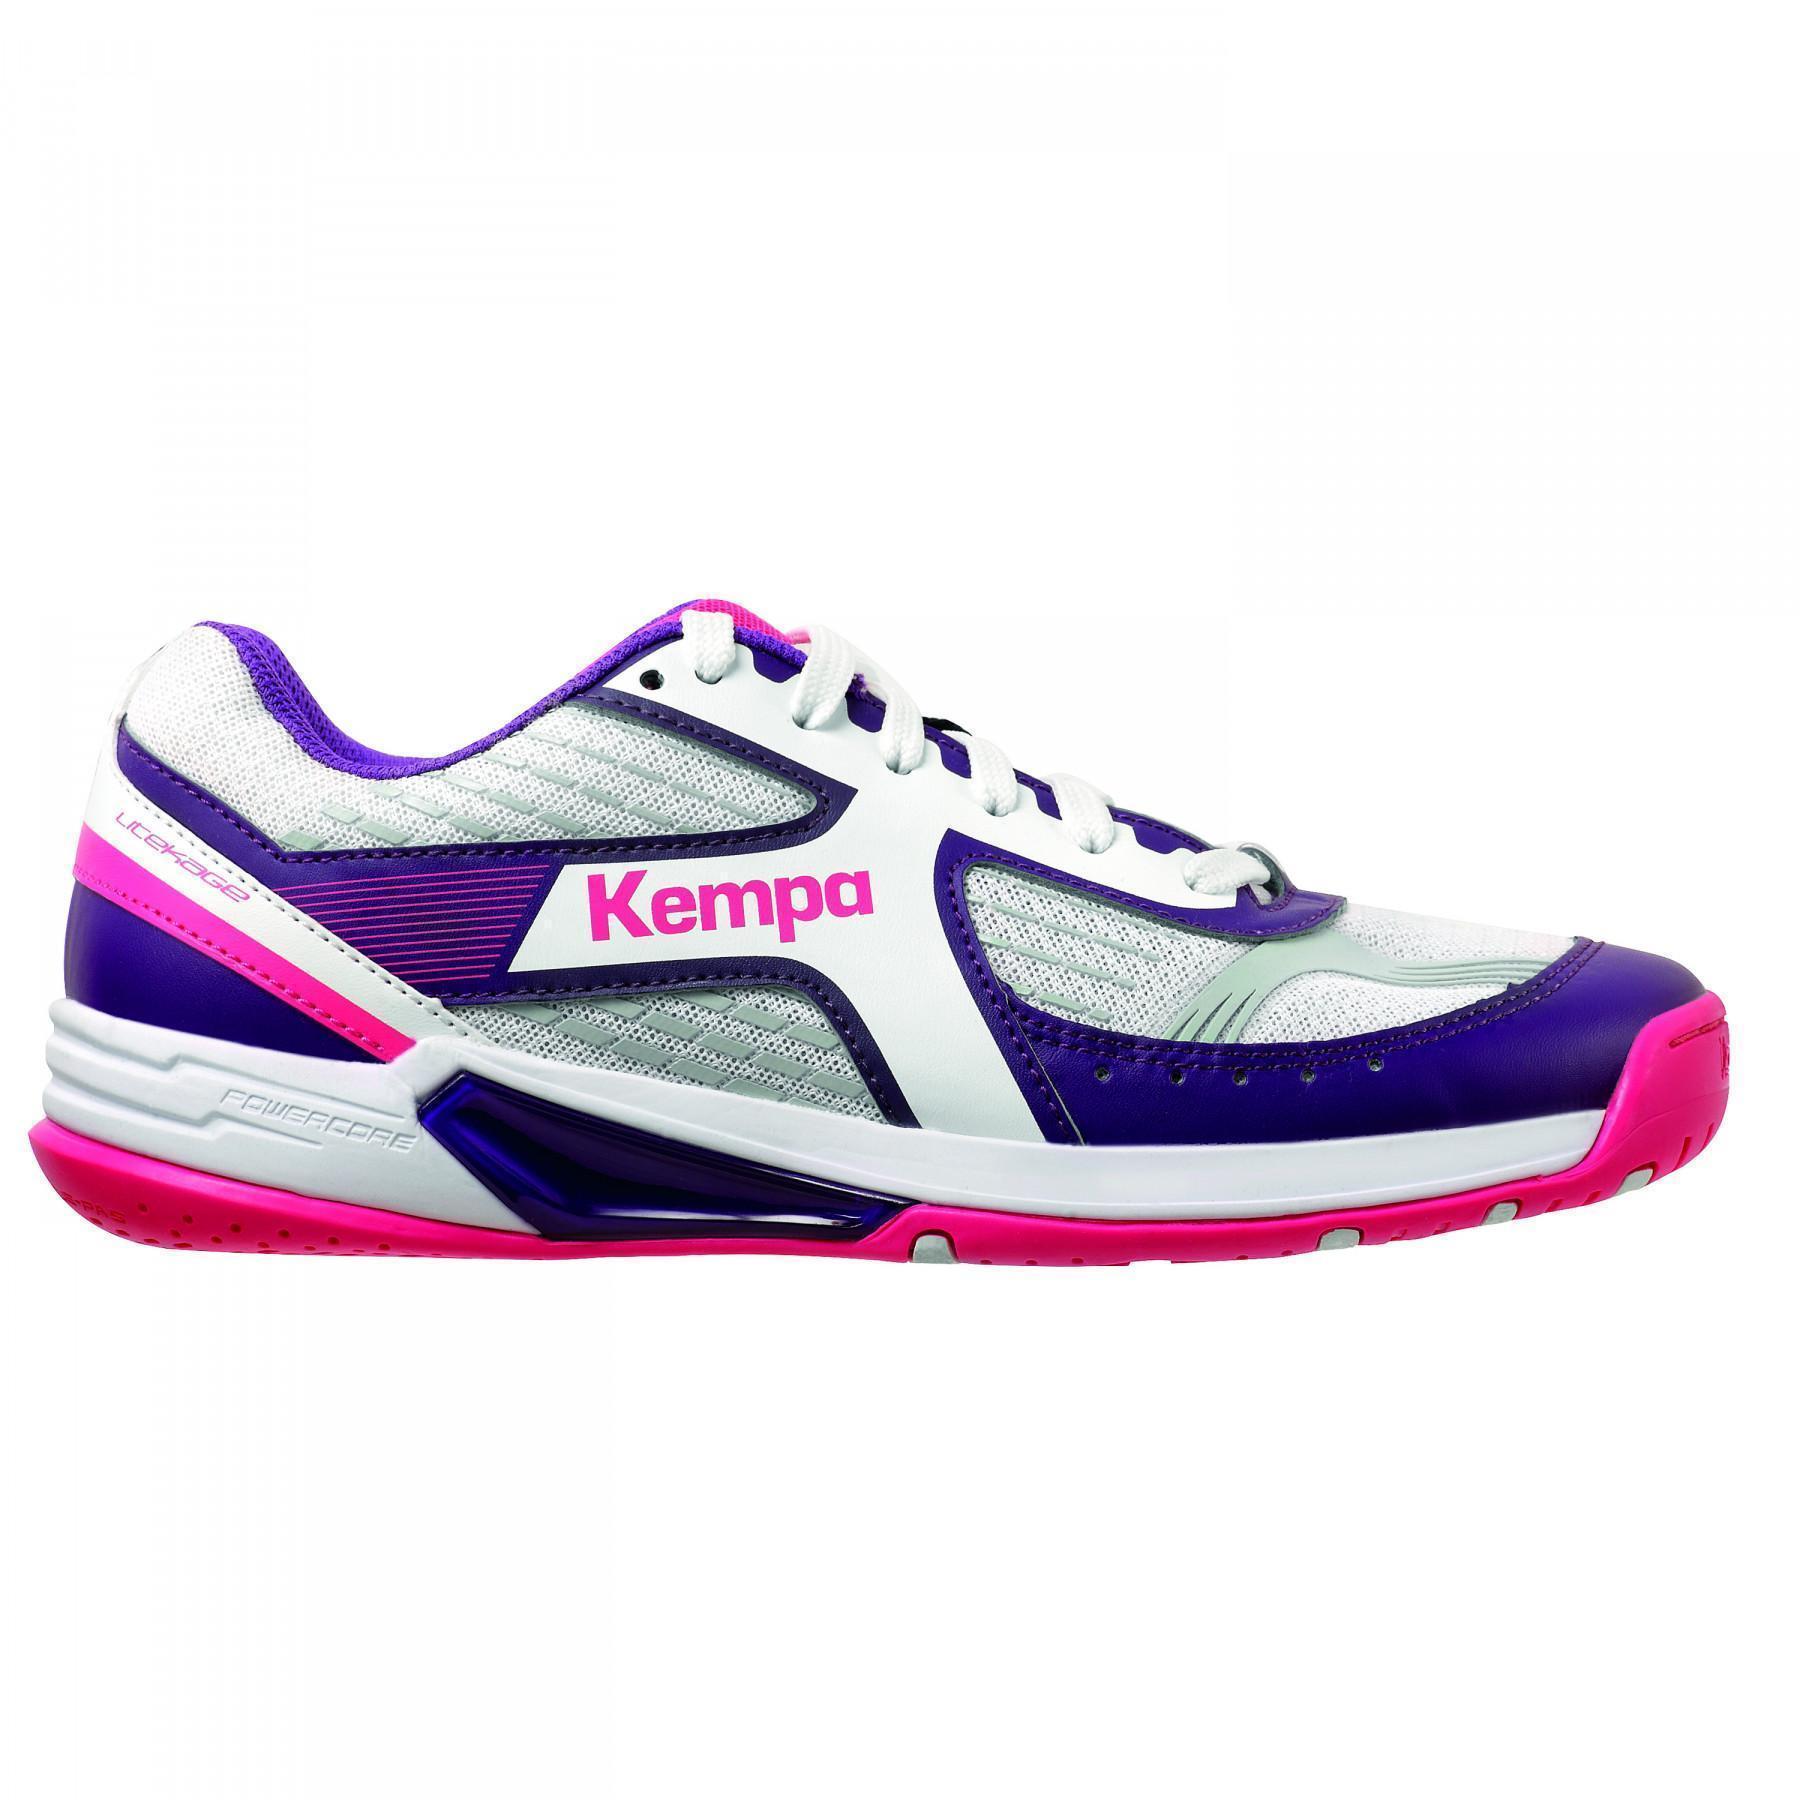 Chaussures Femme Kempa Wing